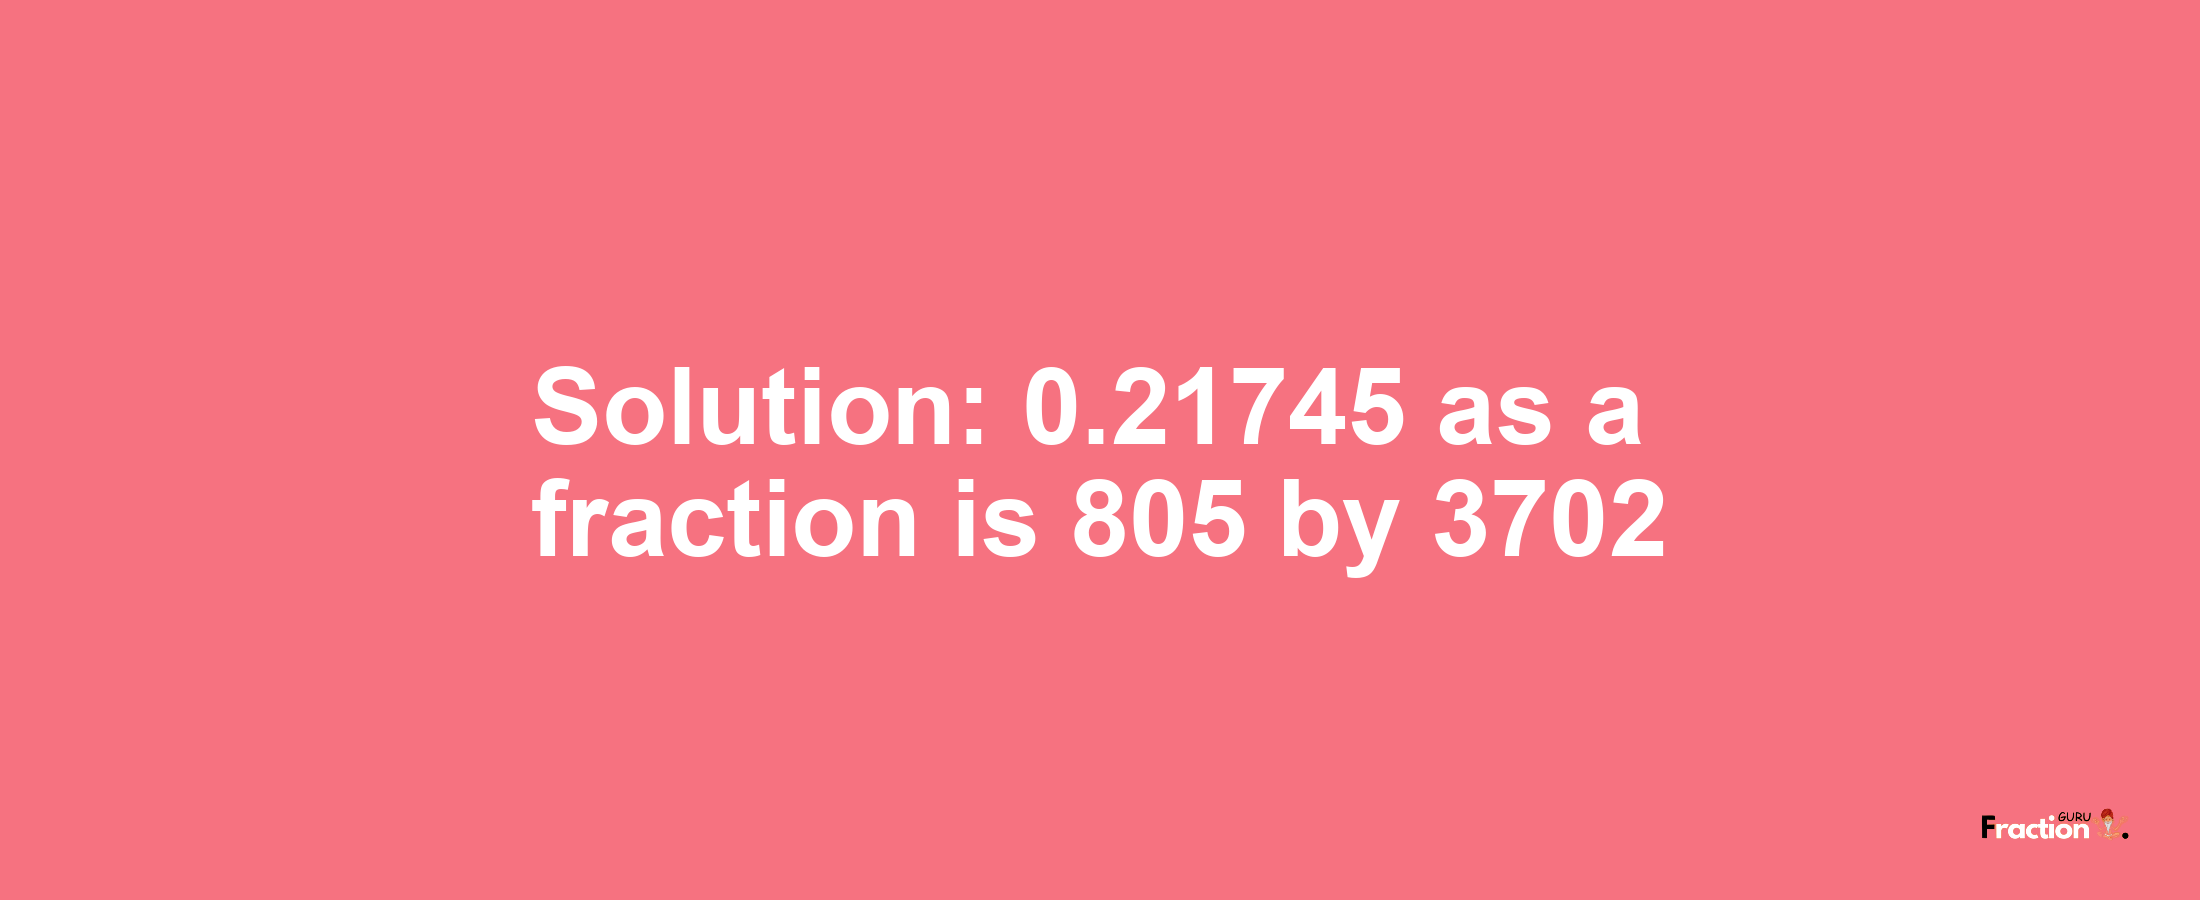 Solution:0.21745 as a fraction is 805/3702